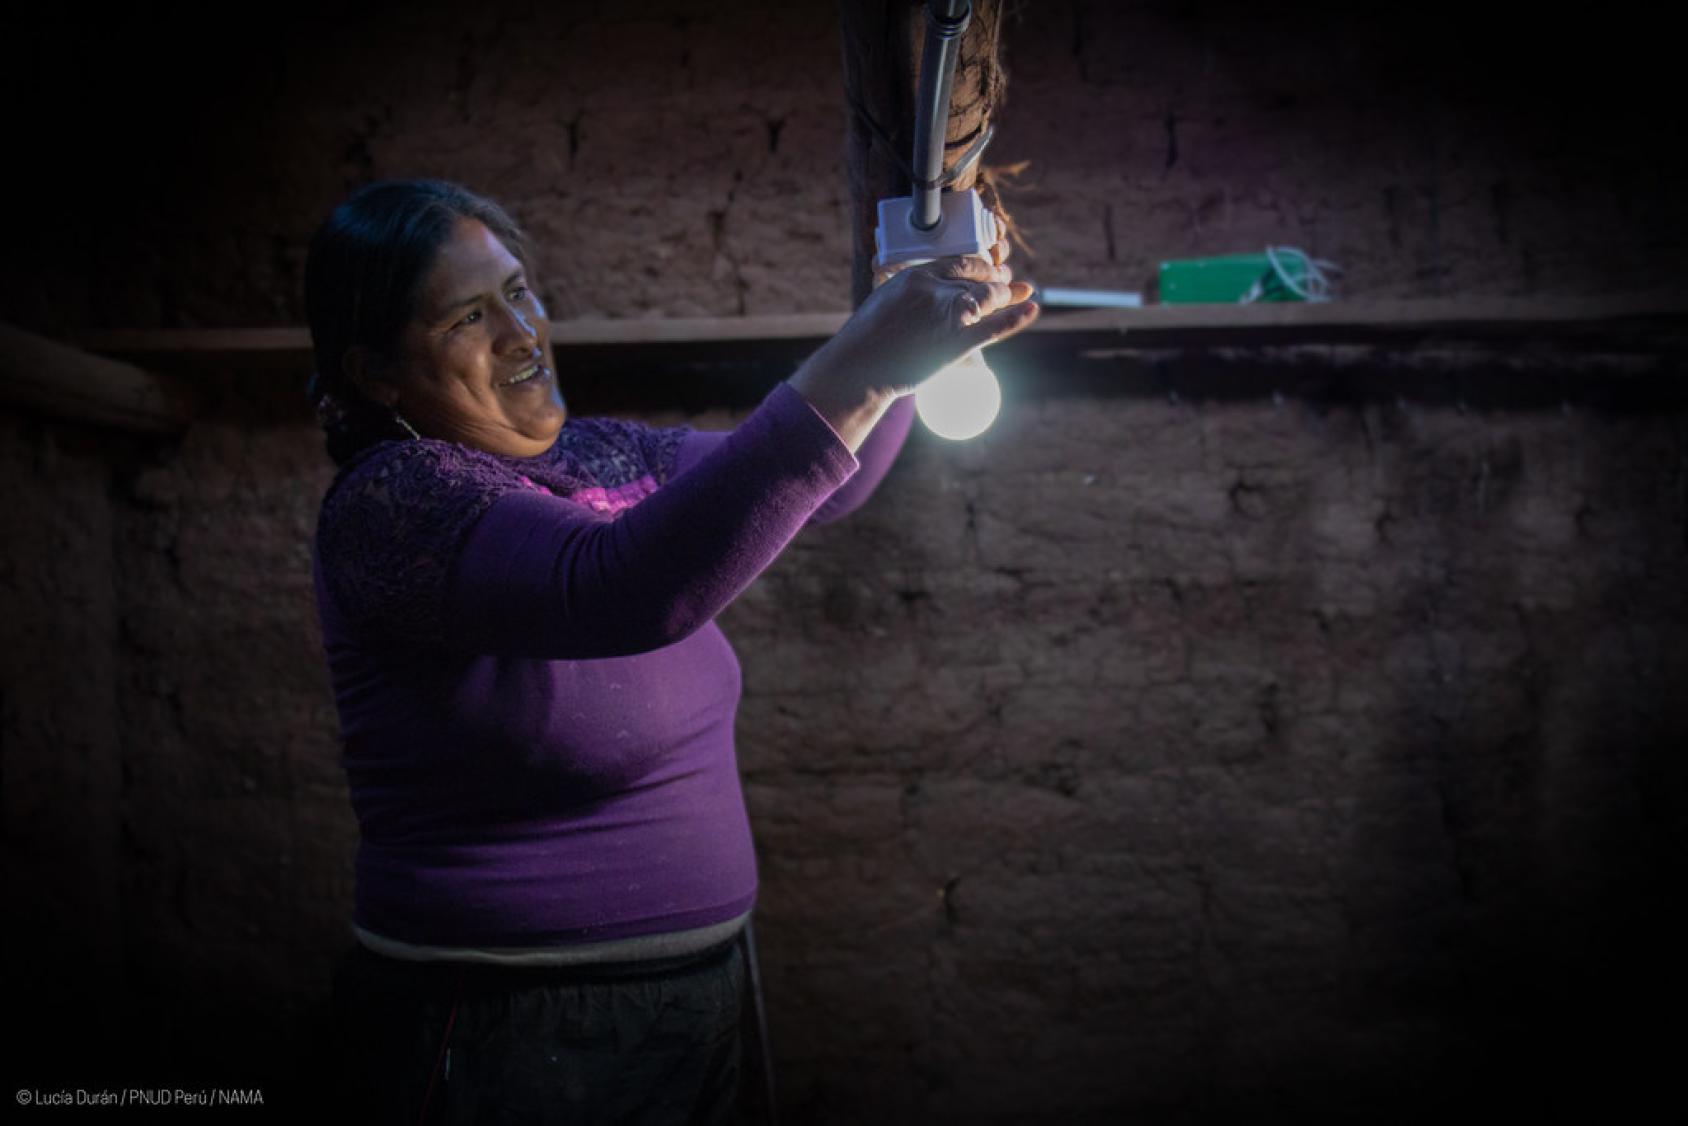 A woman in a purple sweater screws on a light bulb in a dark house